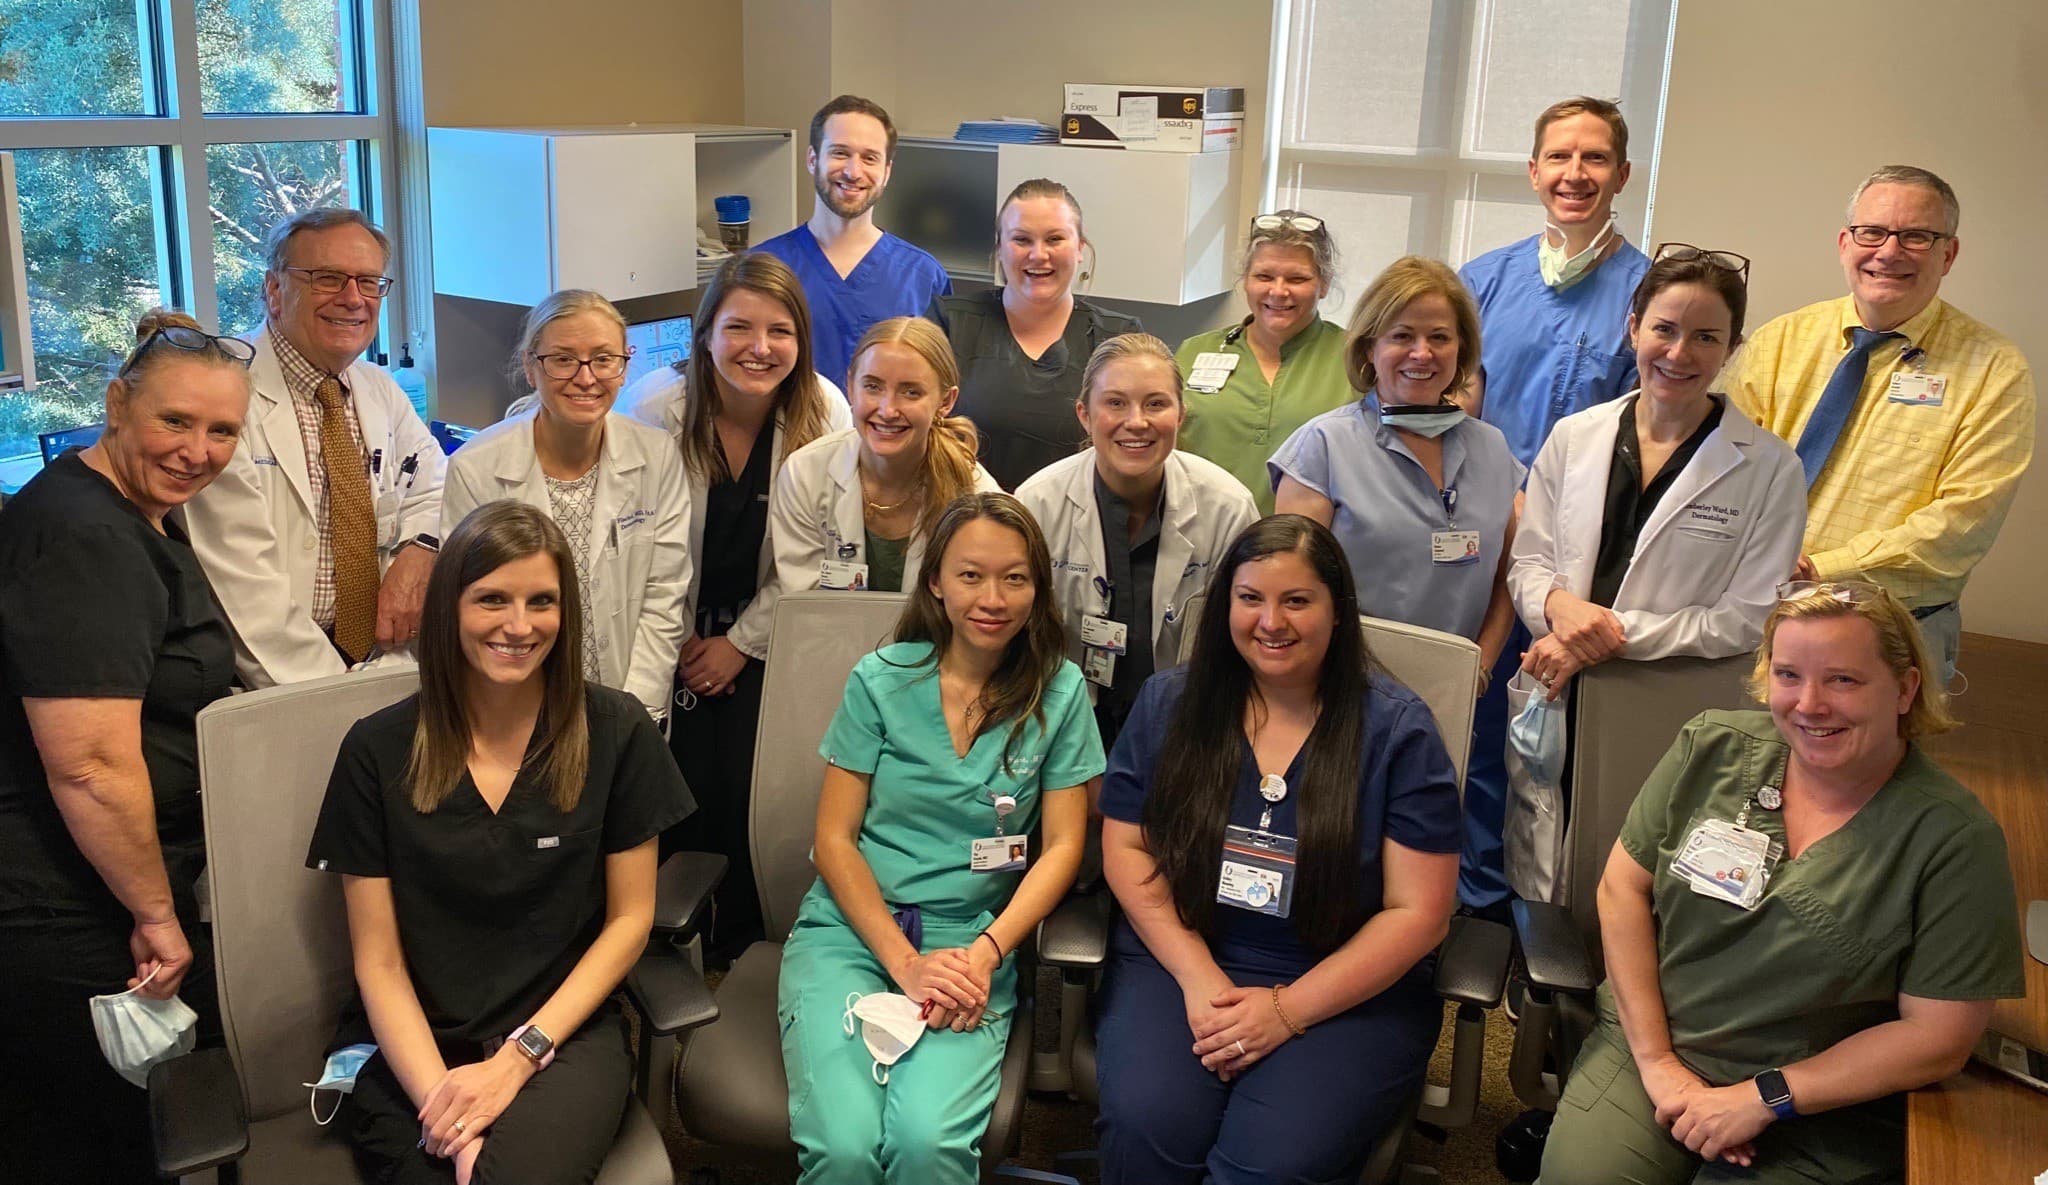 Group picture of UMMC Dermatology staff